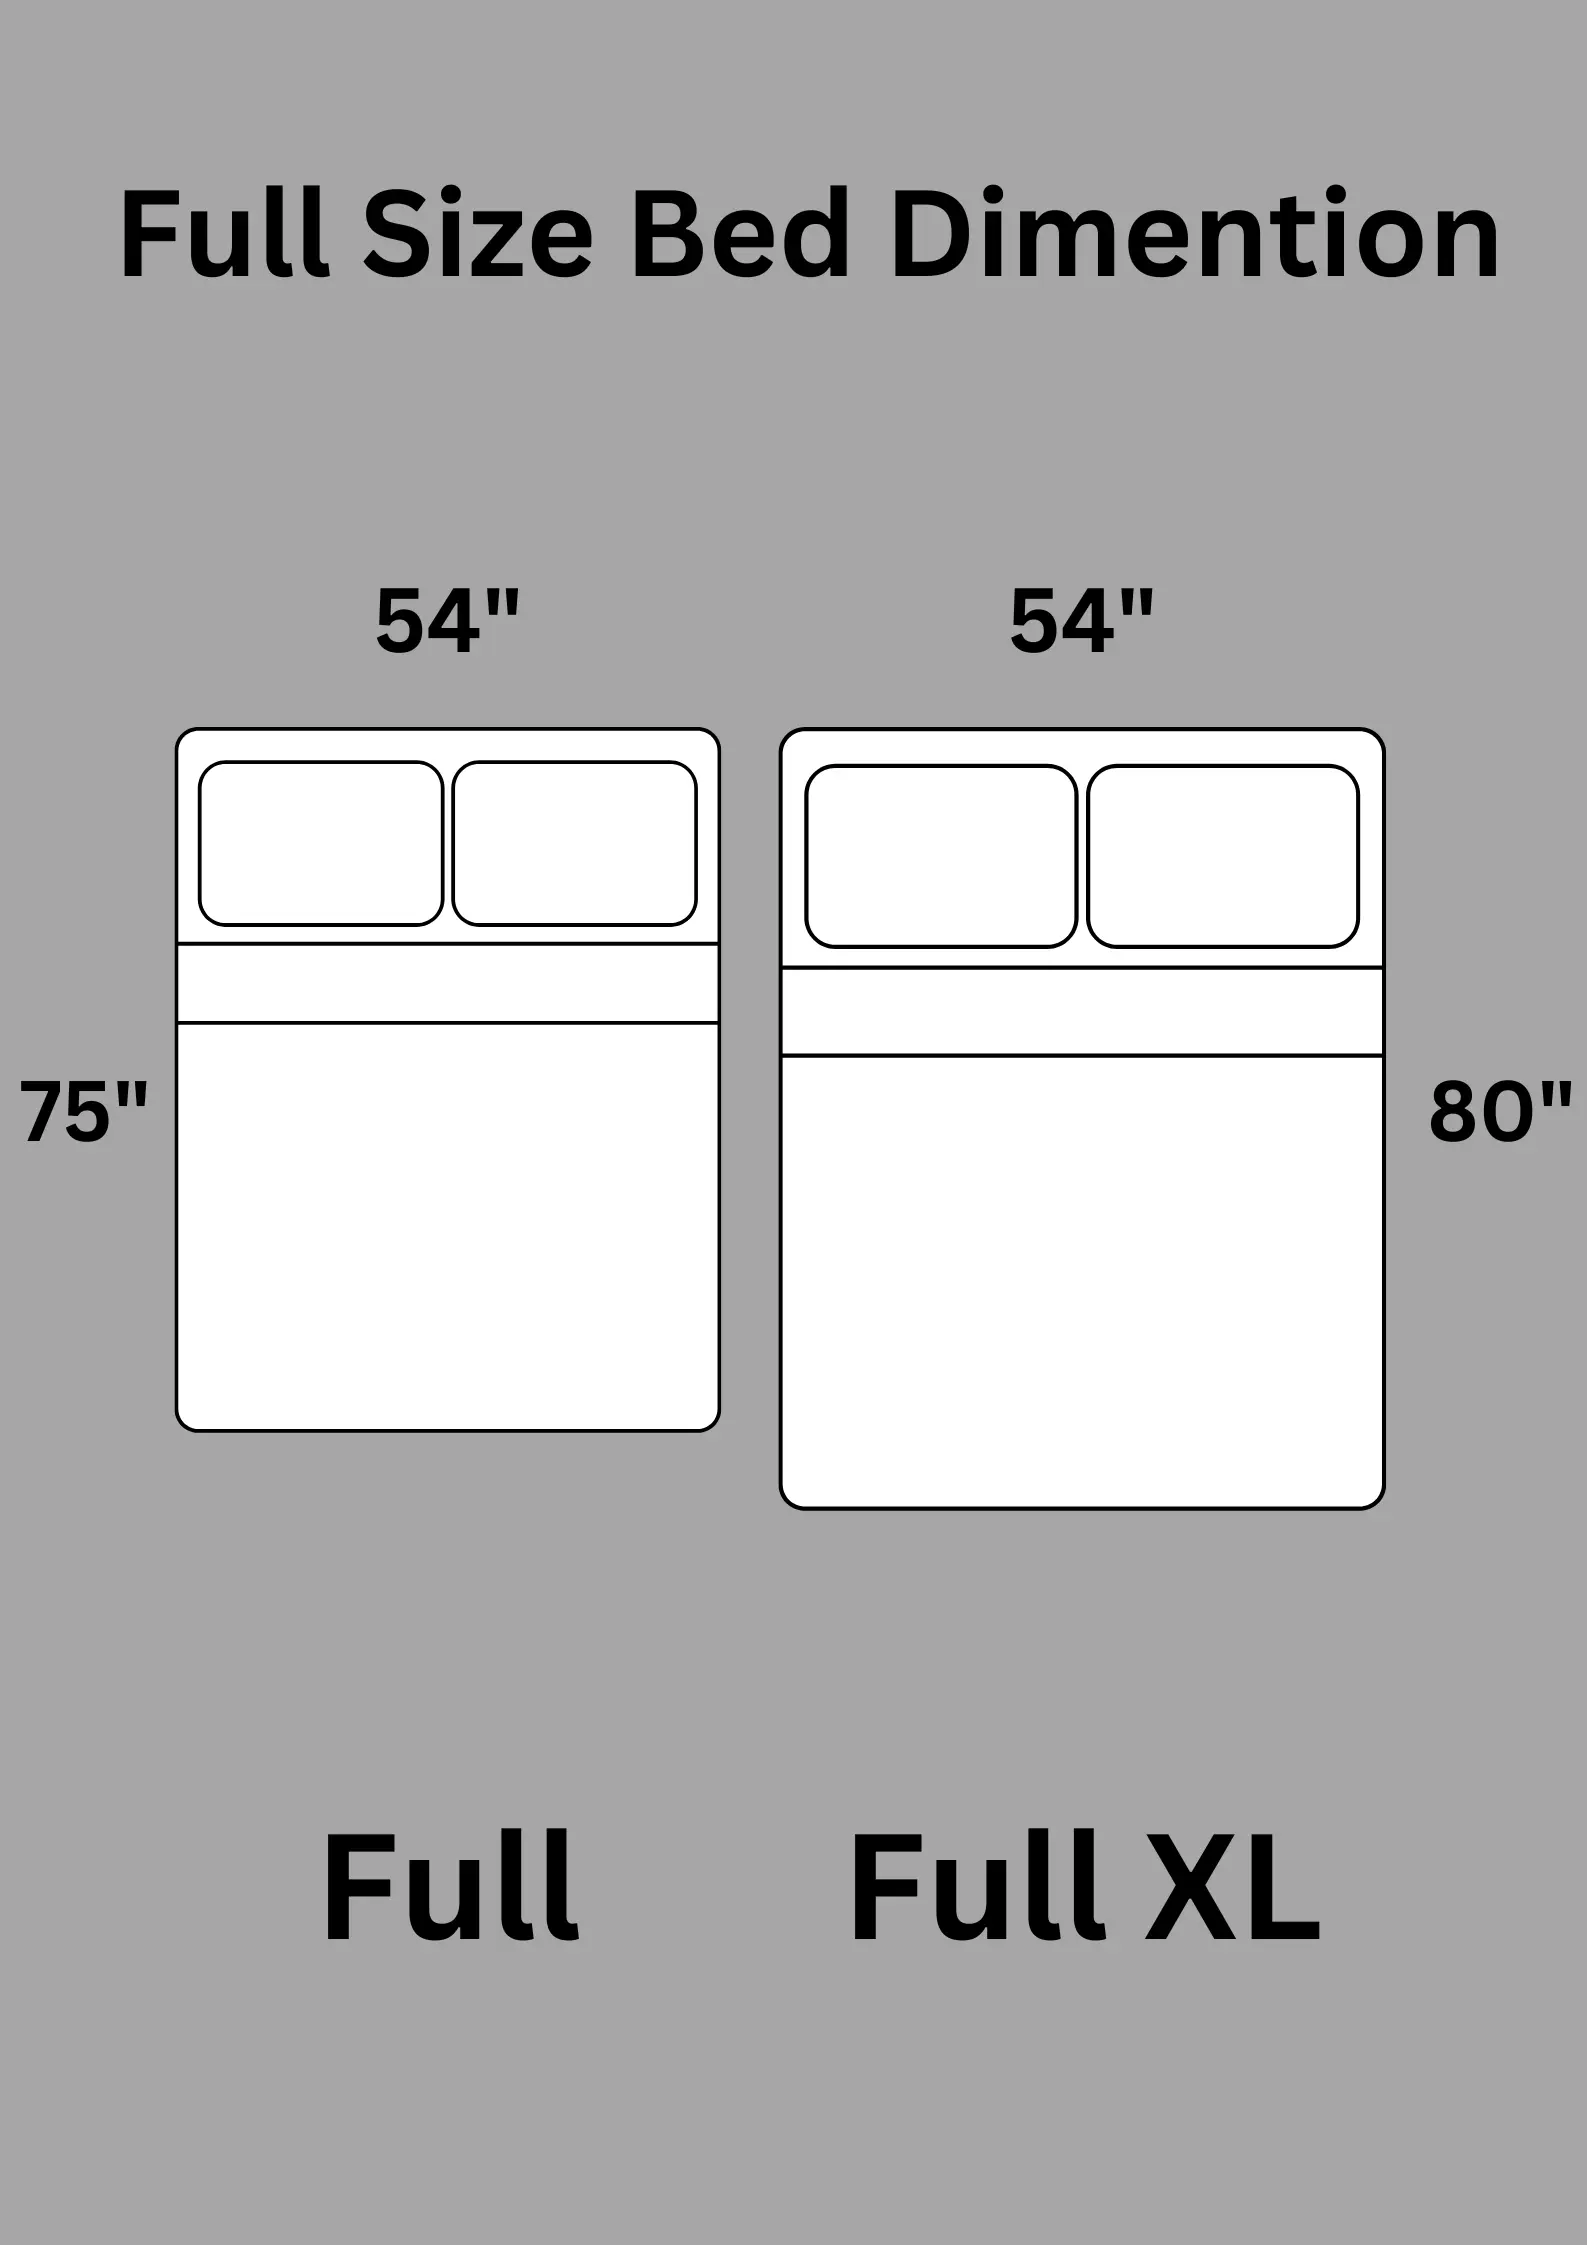 image shows the deferent sizes of Full size mattress vs Full XL